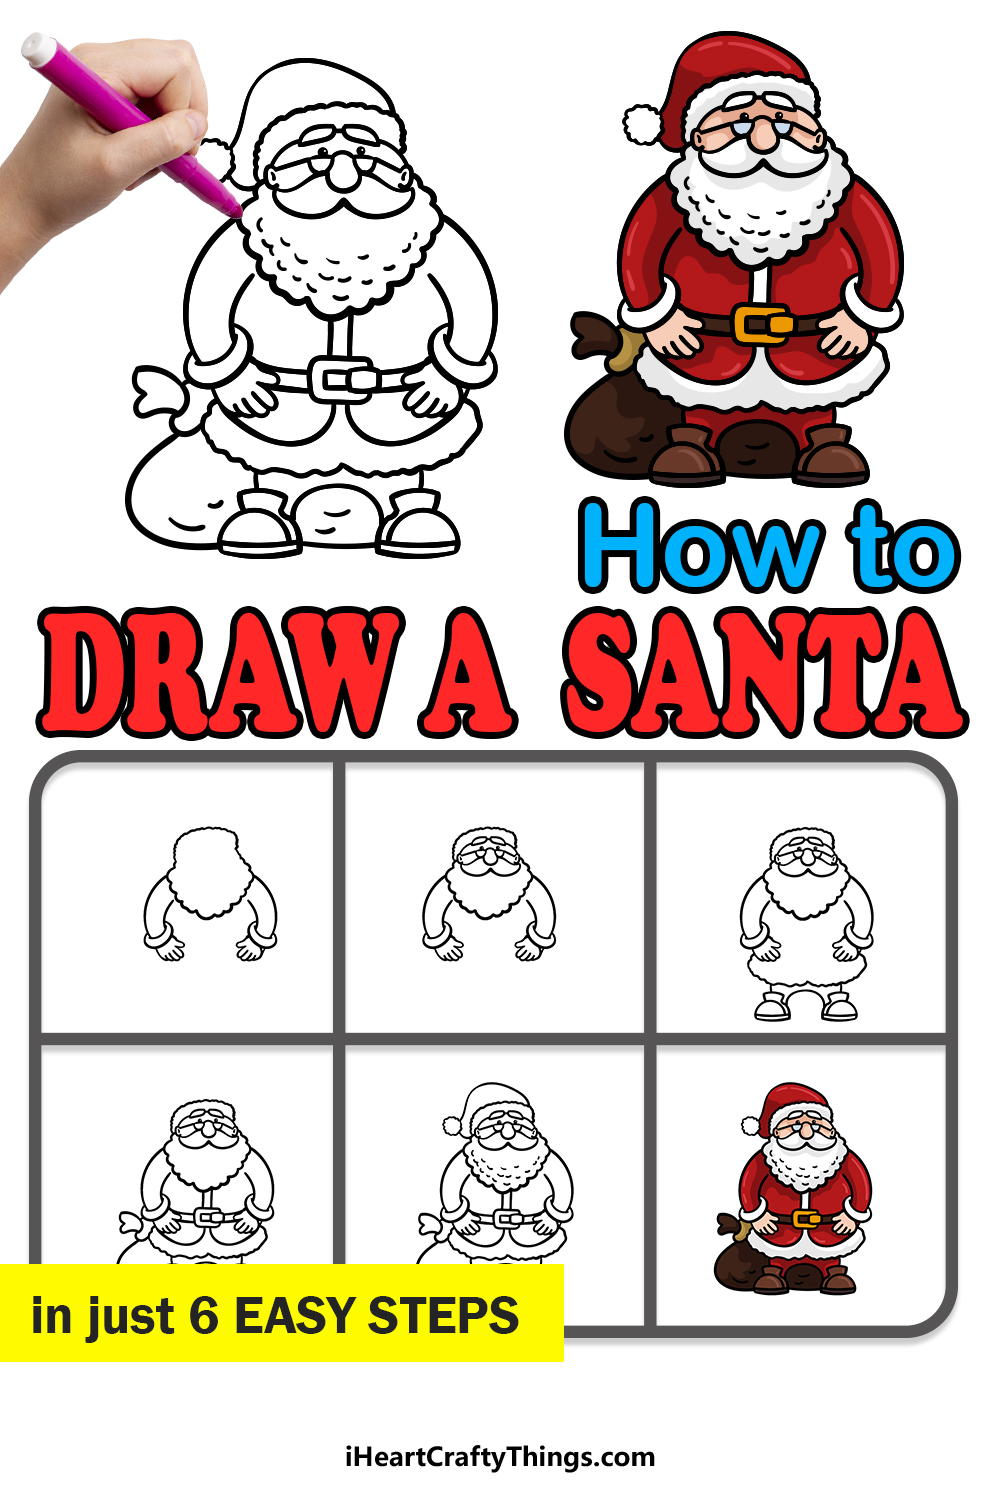 how to draw a cartoon Santa in 6 easy steps